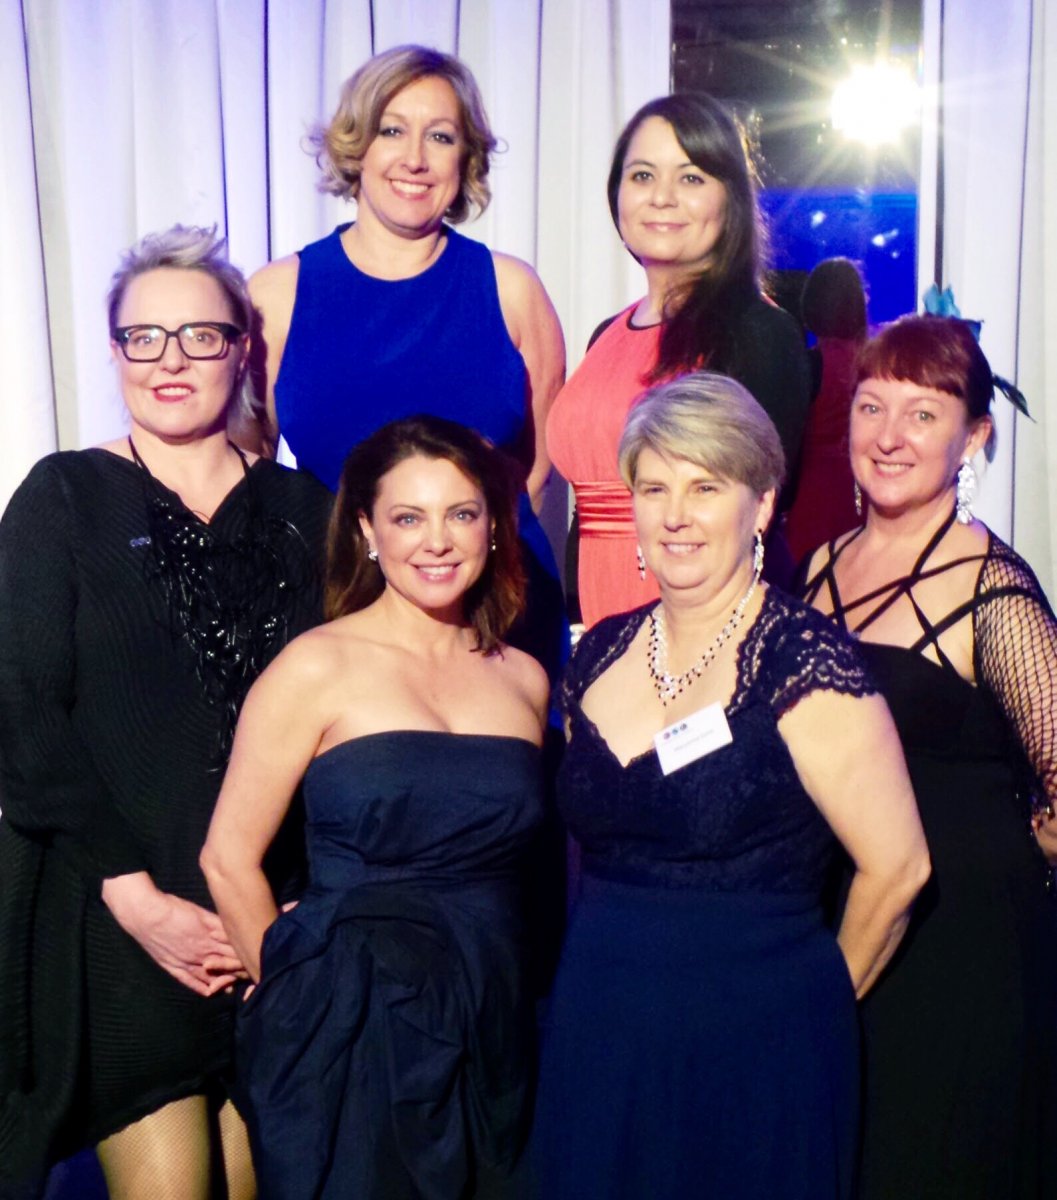 Solace Creations' Karen Porter wins Canberra Business Woman of the Year Award